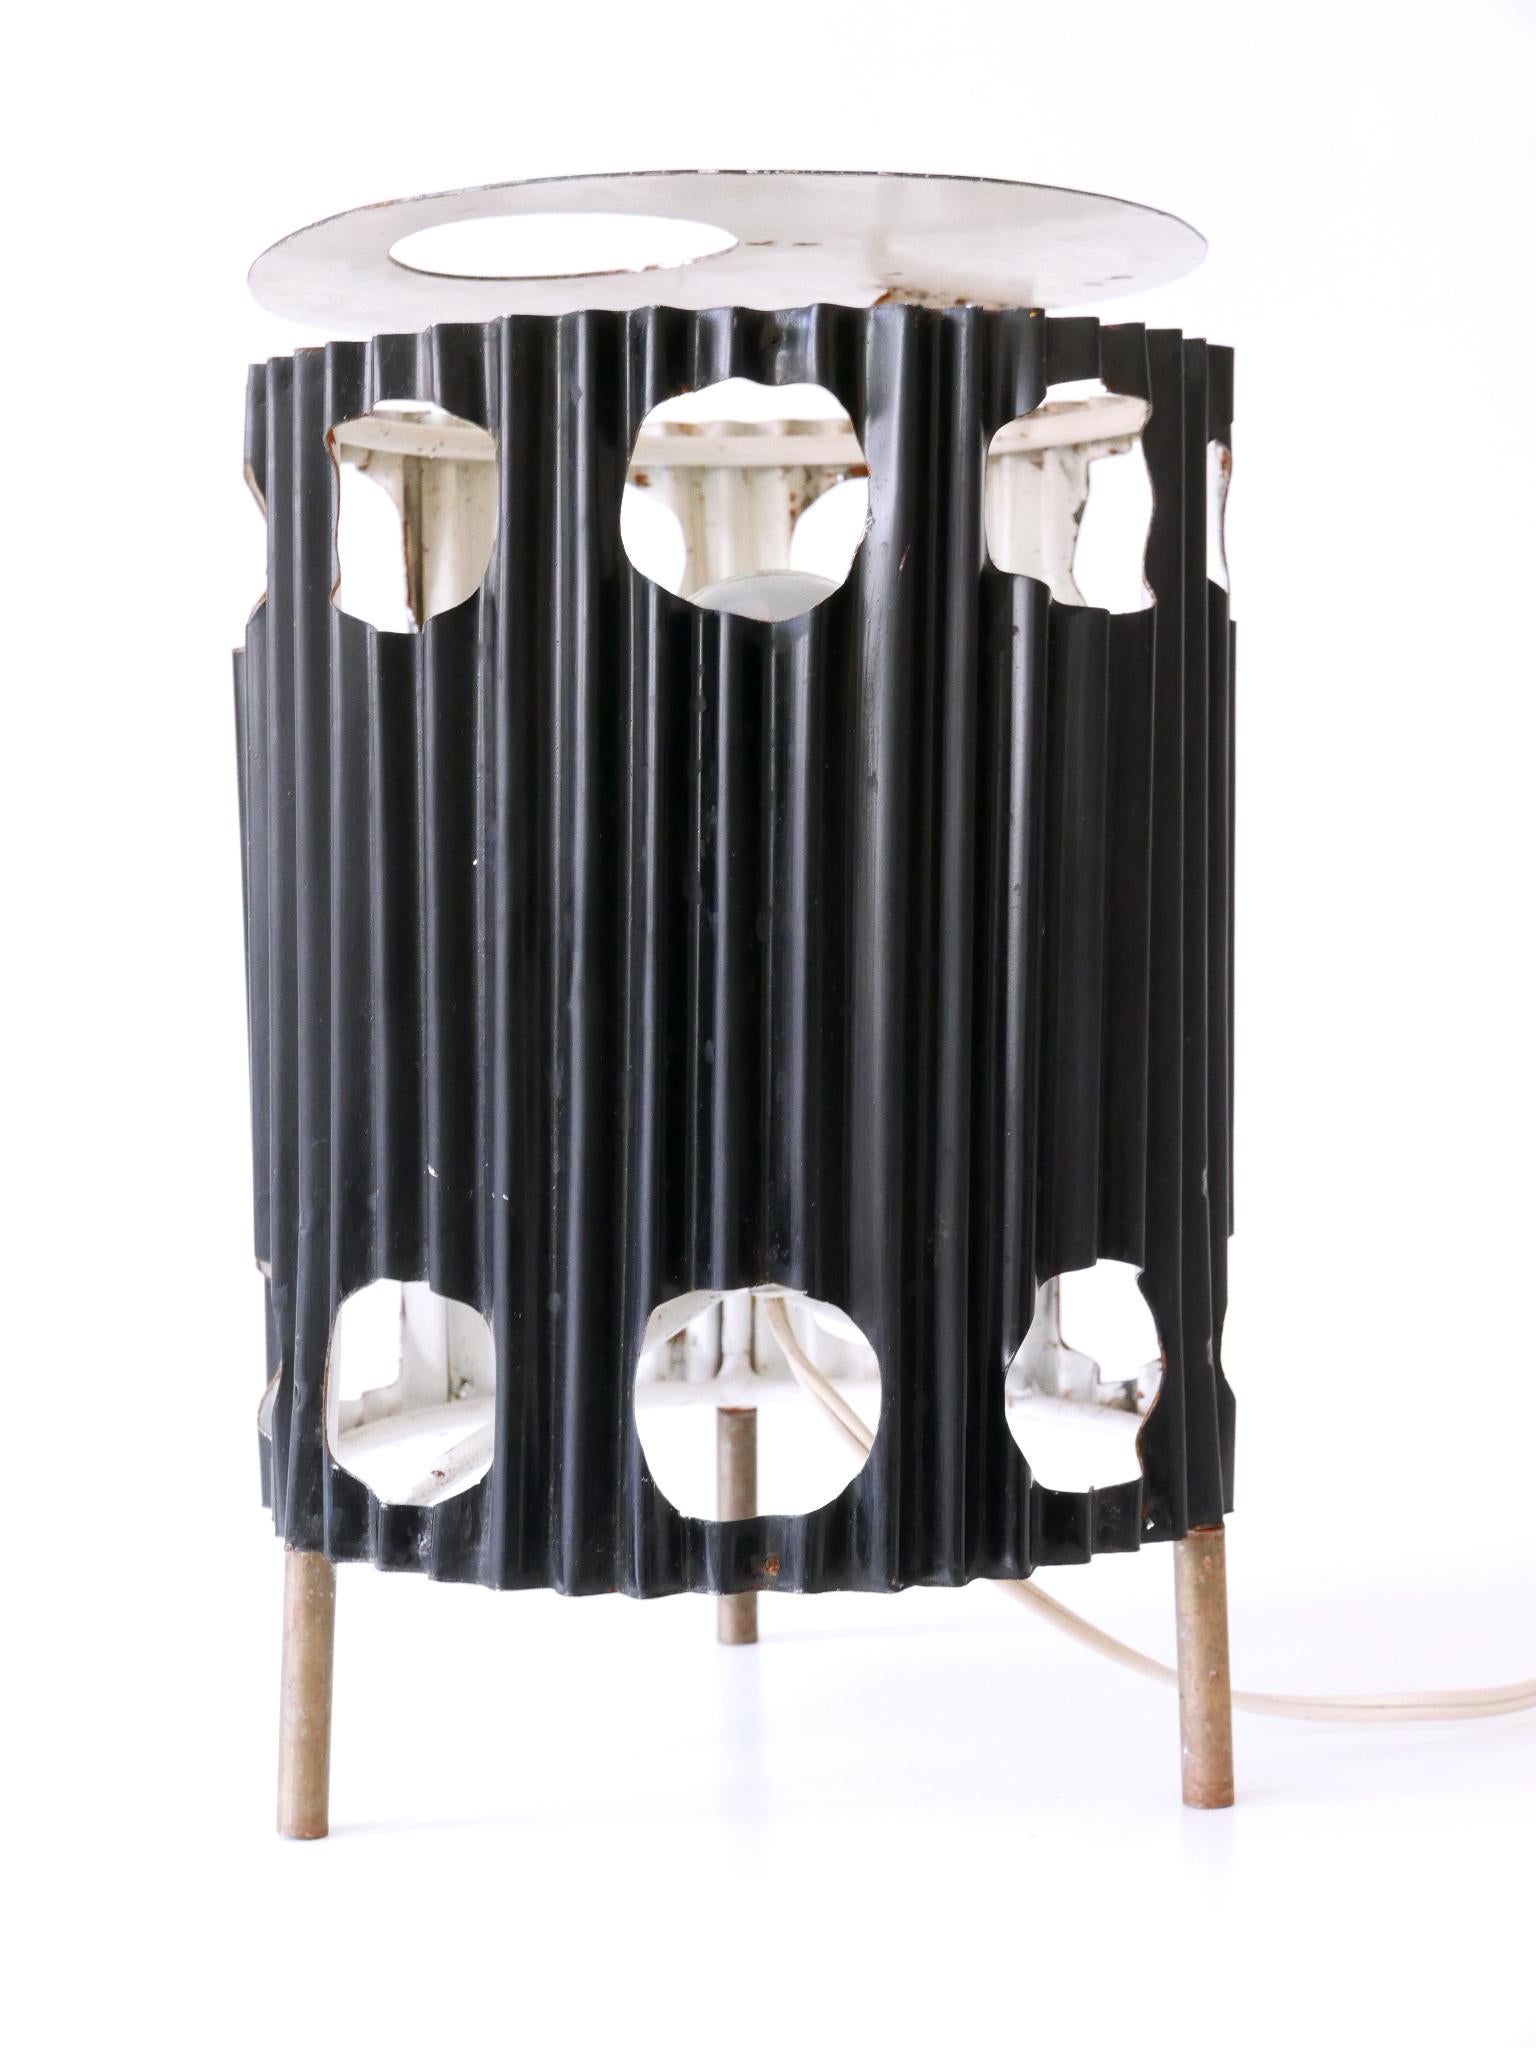 Extremely Rare Mid-Century Modern Table Lamp 'Java' by Mathieu Matégot 1950s For Sale 7